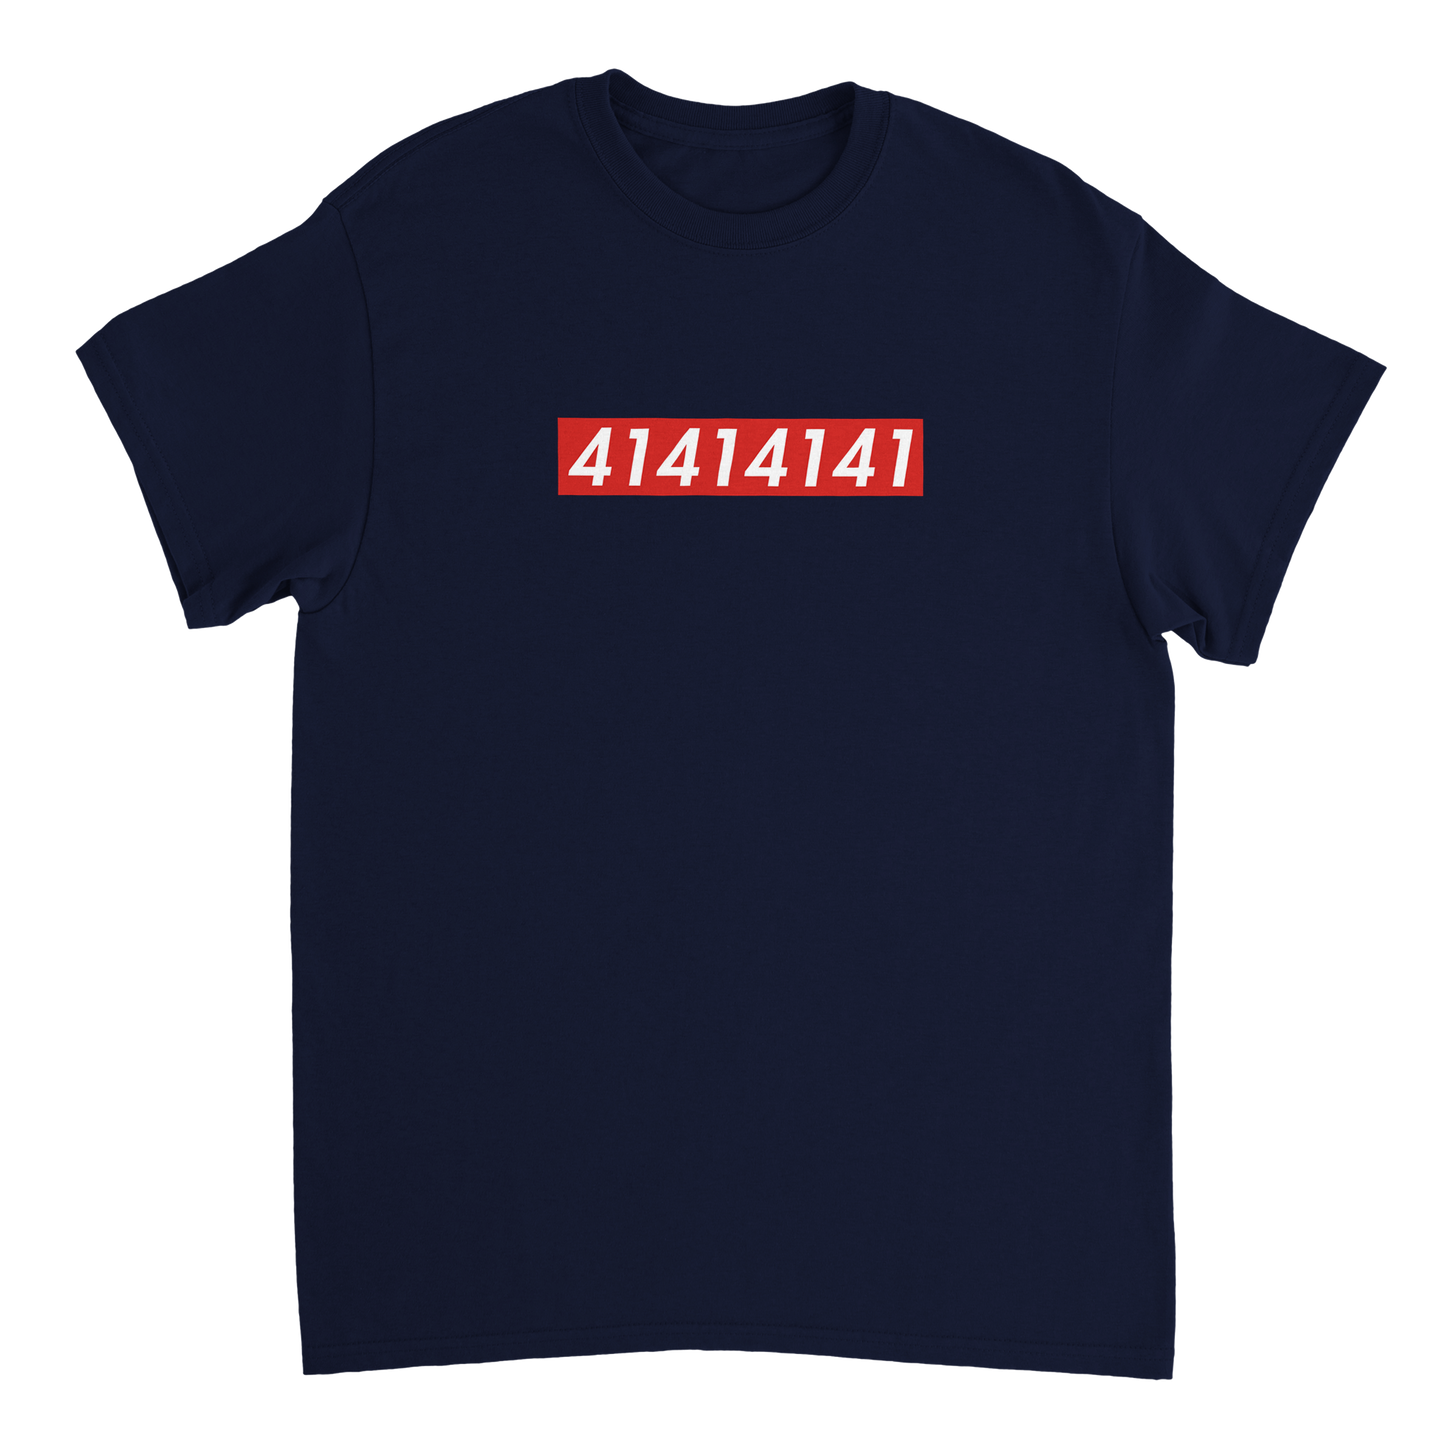 41414141 banner in a trendy style Unisex T-Shirt